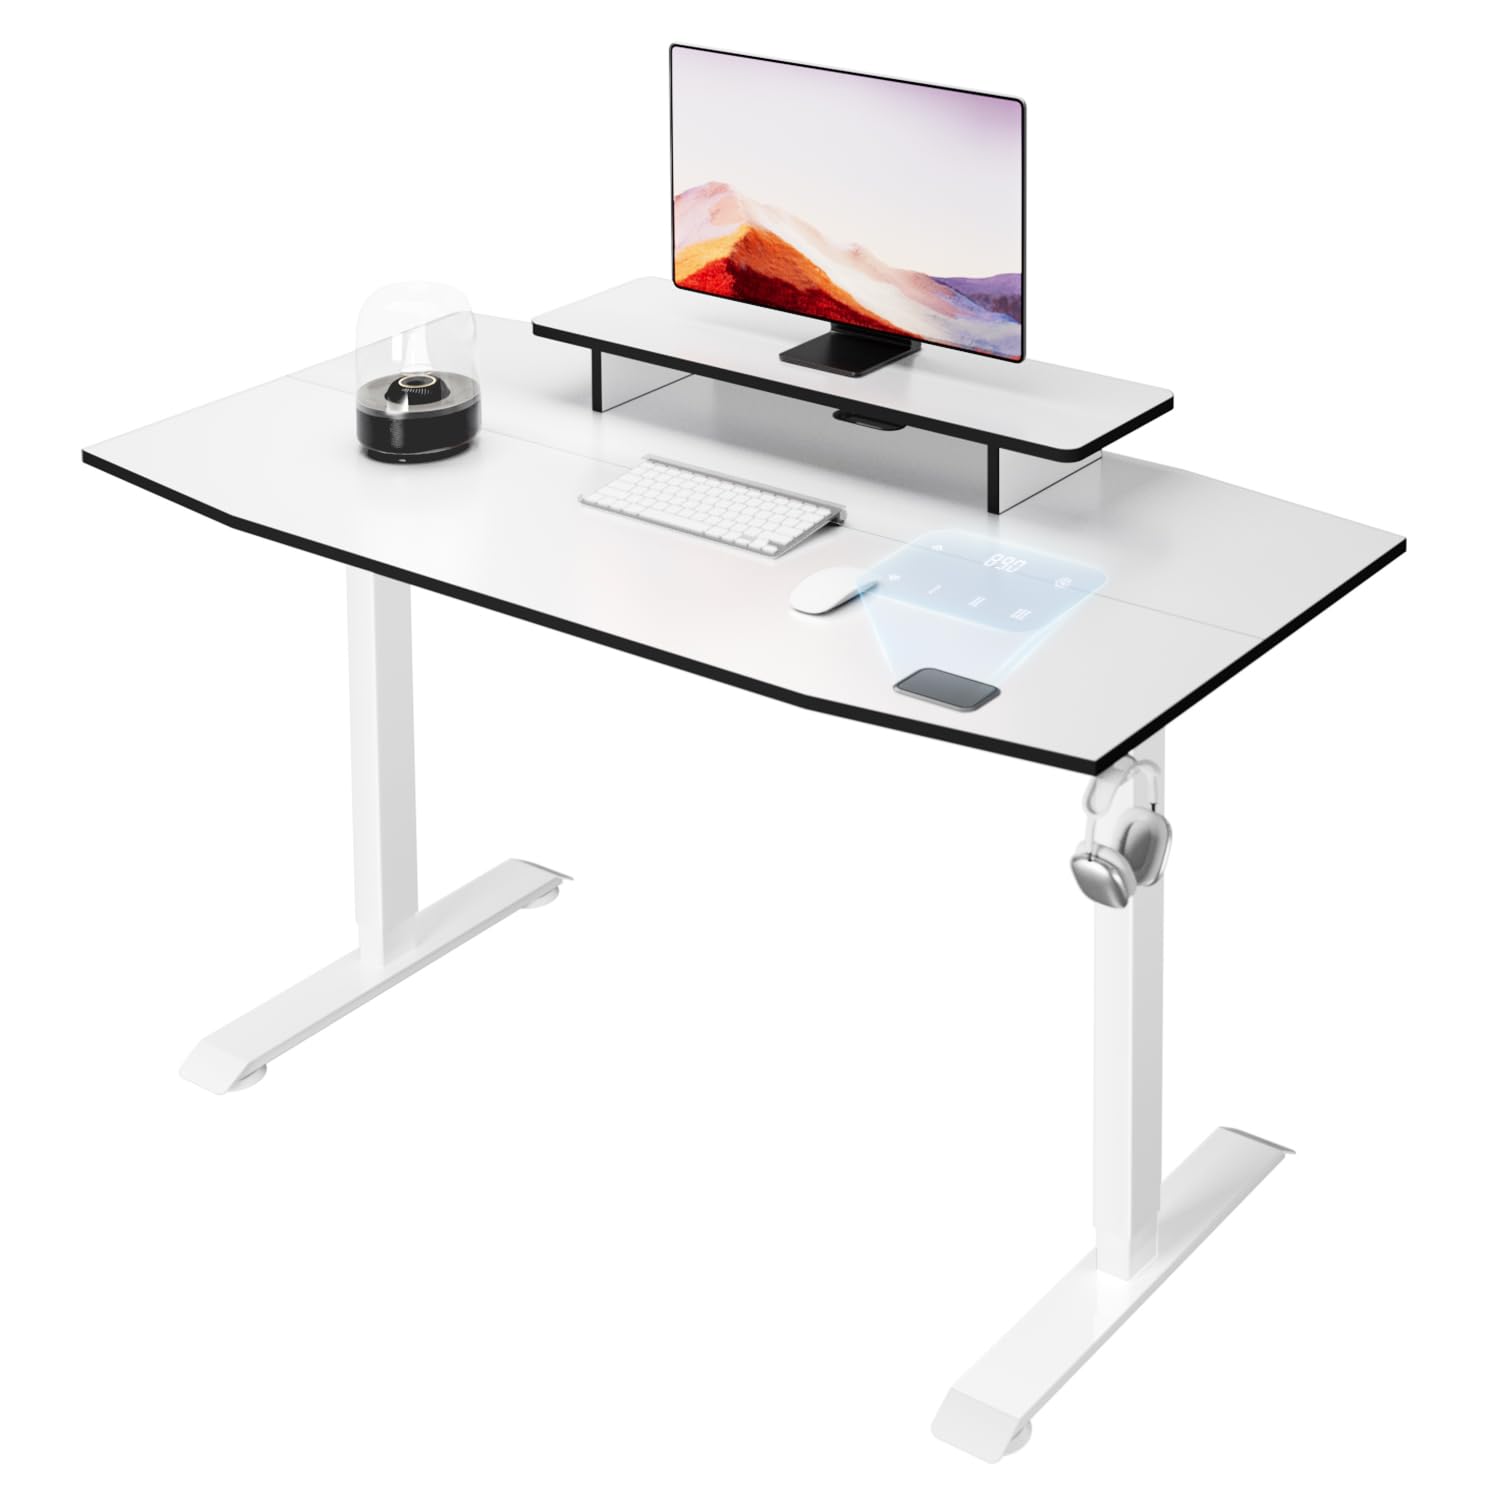 Generic Electric Height Adjustable Standing Desk Home Office Workstation (White, 55 * 28 inch) 55*28 inch White, List Price is $222, Now Only $95.00